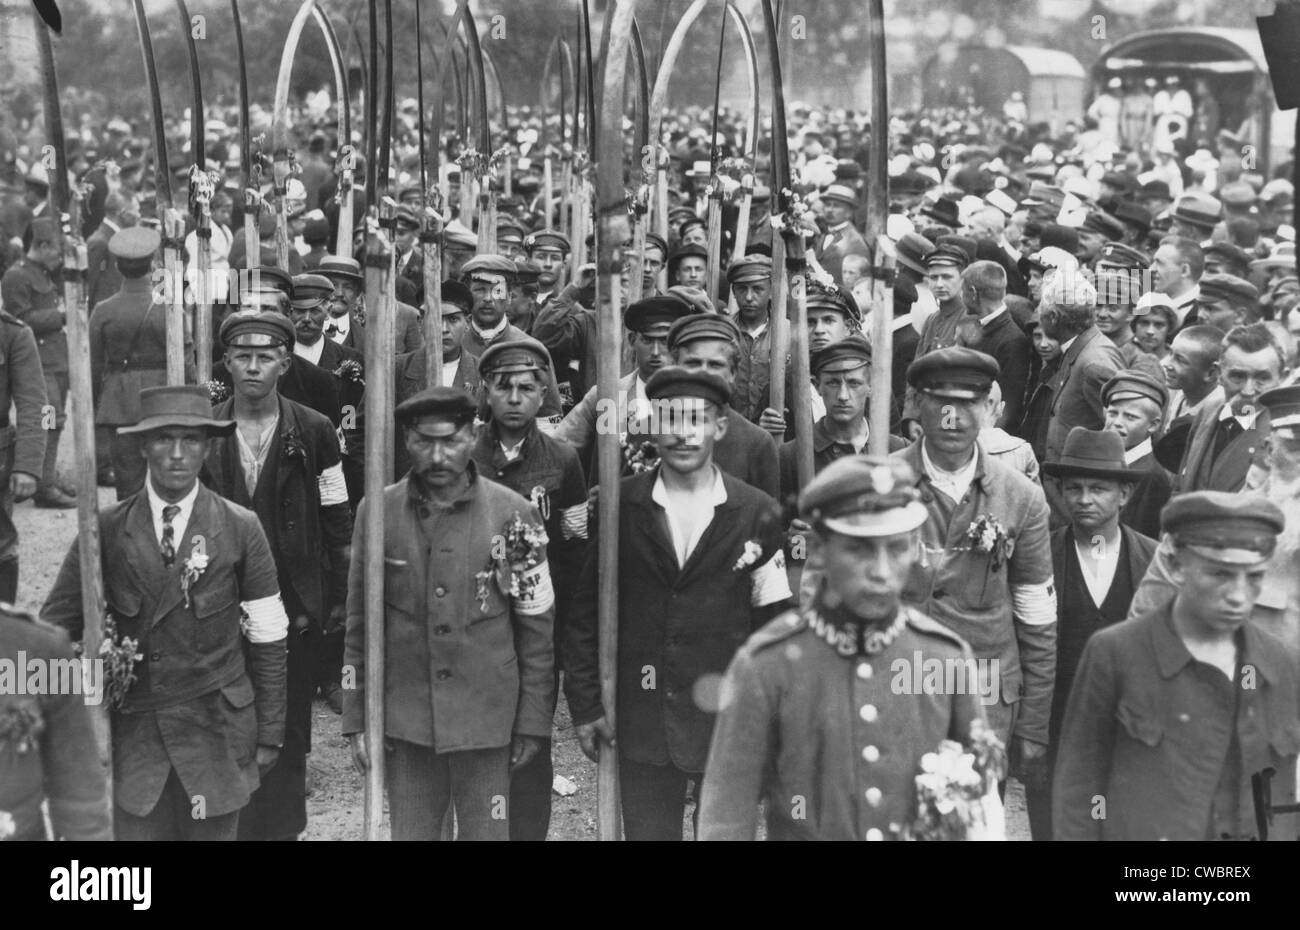 Polish army volunteers with scythes in a crowd of people in July 1920. The Russo-Polish War of 1919-20 followed the creation of Stock Photo